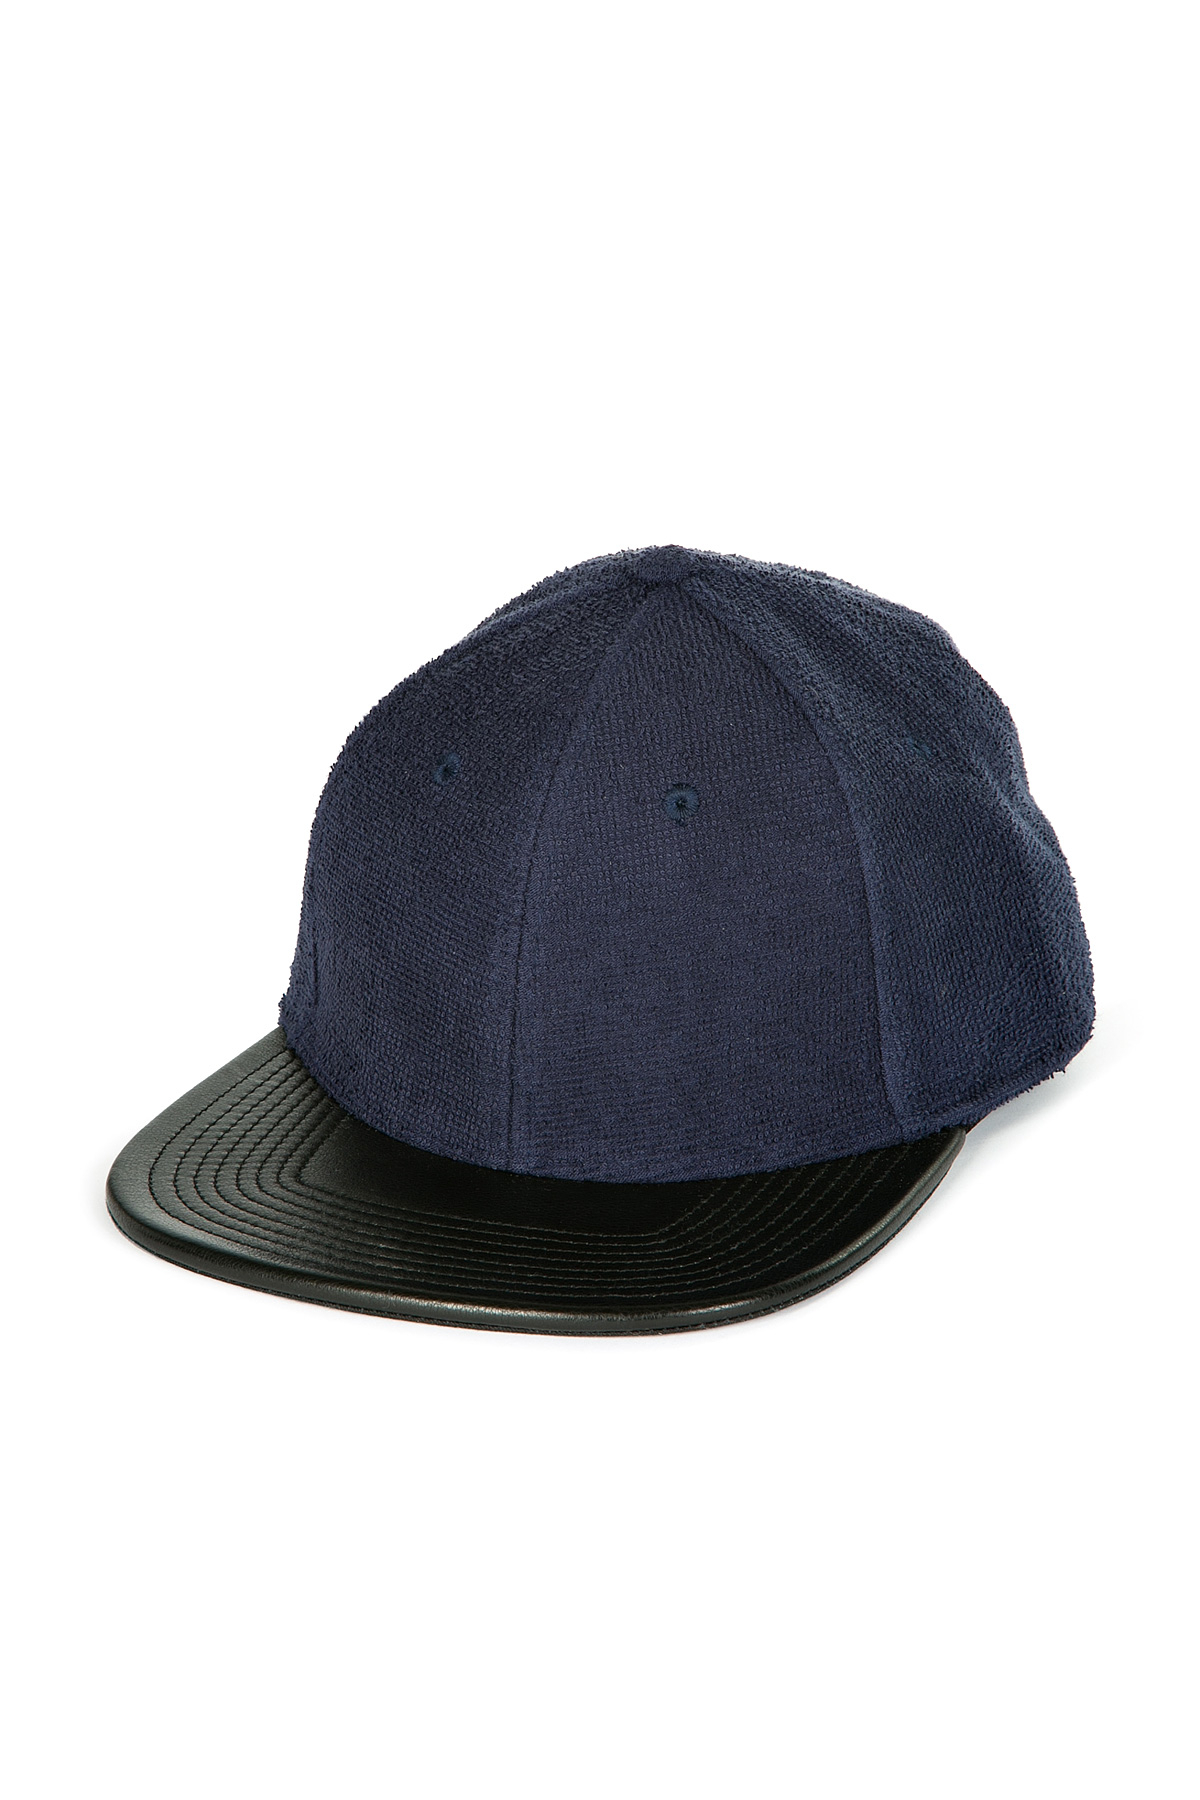 Lyst - Marc By Marc Jacobs Denim Cap With Leather Brim in Blue for Men